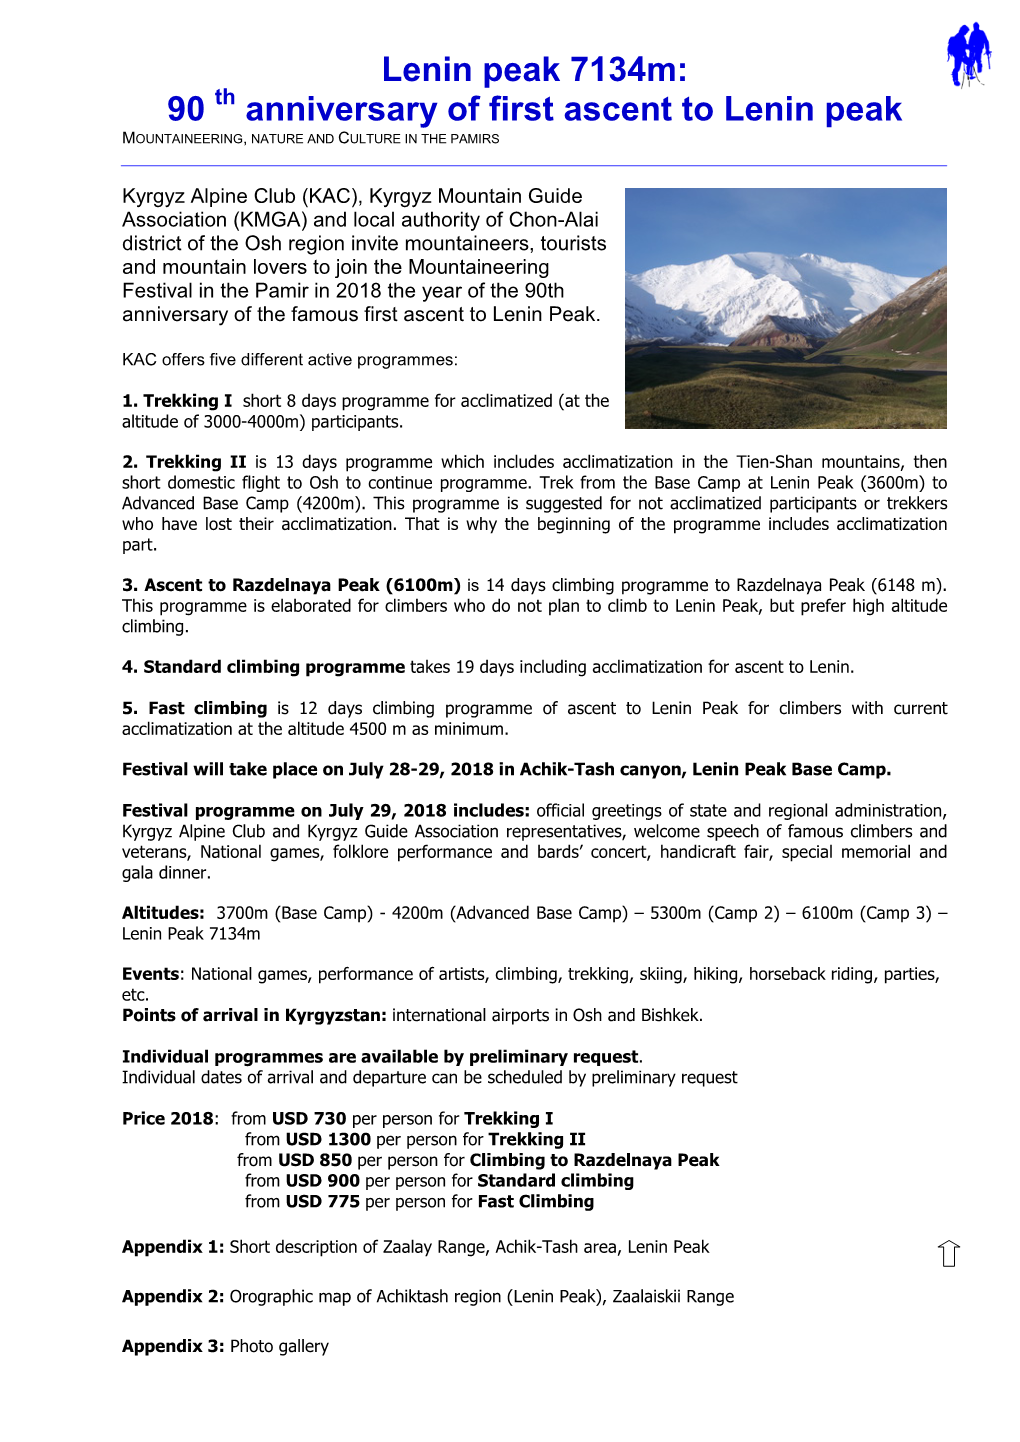 Lenin Peak 7134M: 90 Th Anniversary of First Ascent to Lenin Peak MOUNTAINEERING, NATURE and CULTURE in the PAMIRS